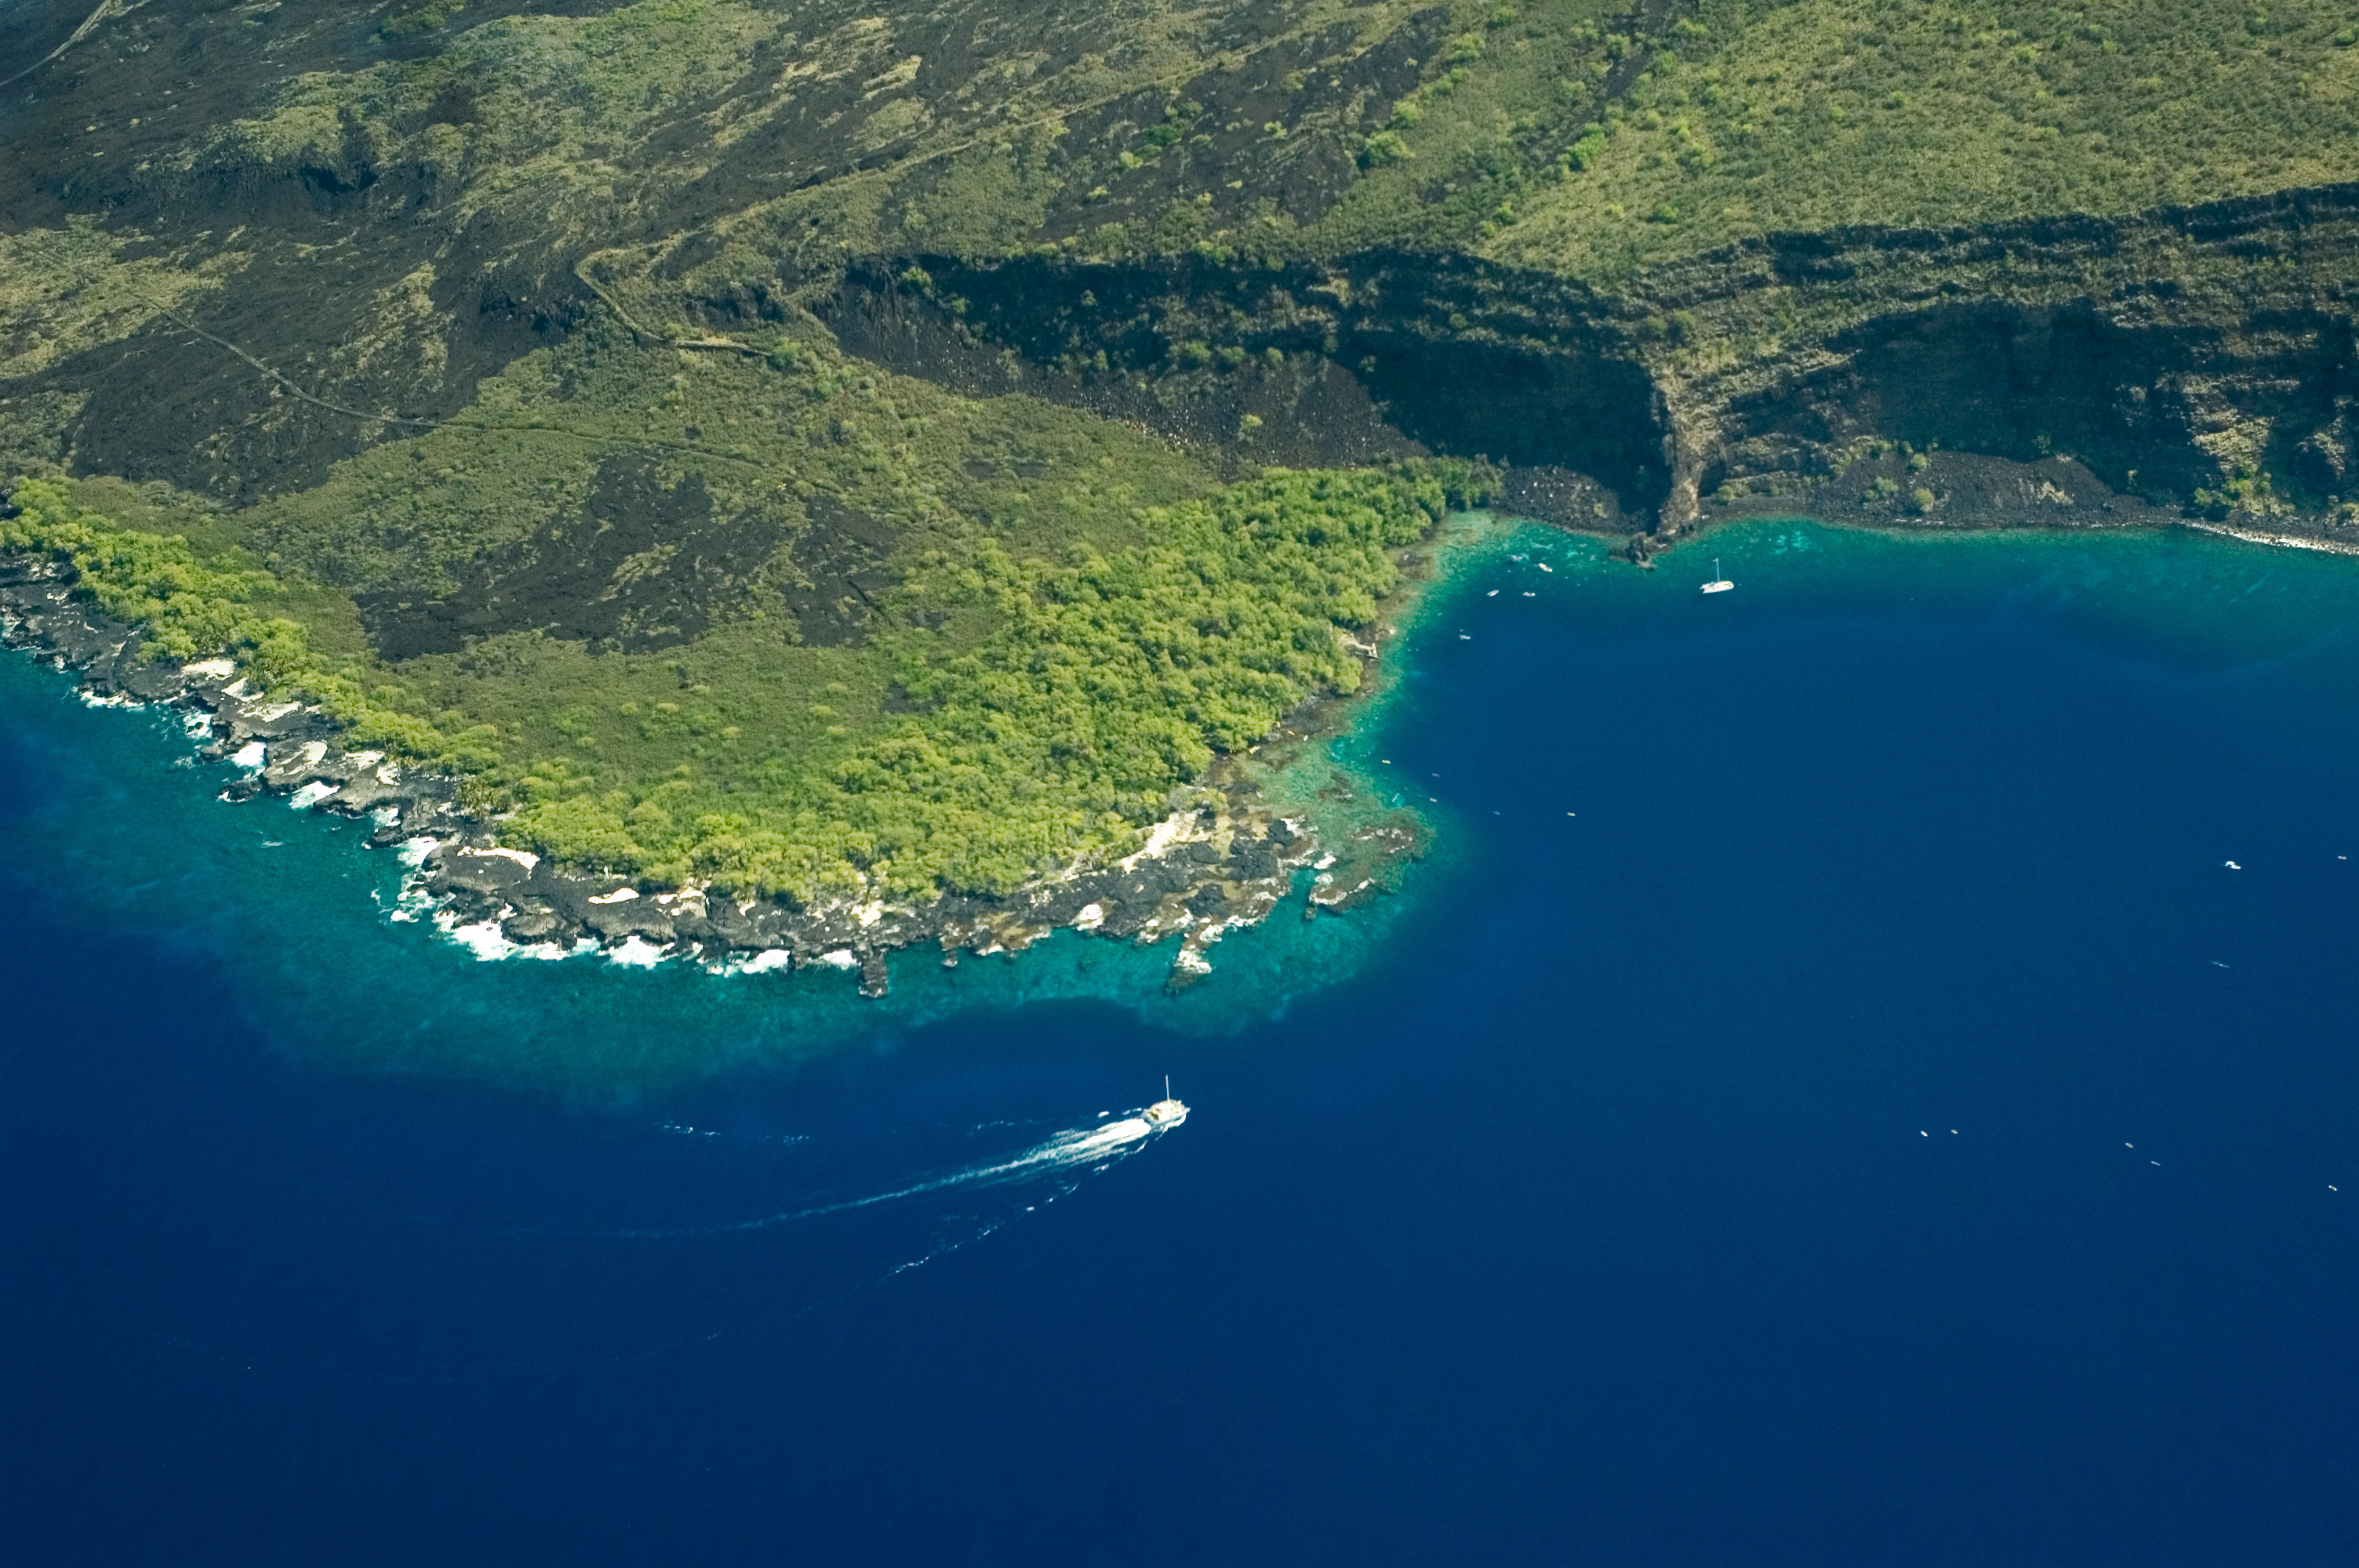 Go south towards Kealakekua Bay, where turtles relax in the beautiful water and the snorkelling is arguably the best on the island